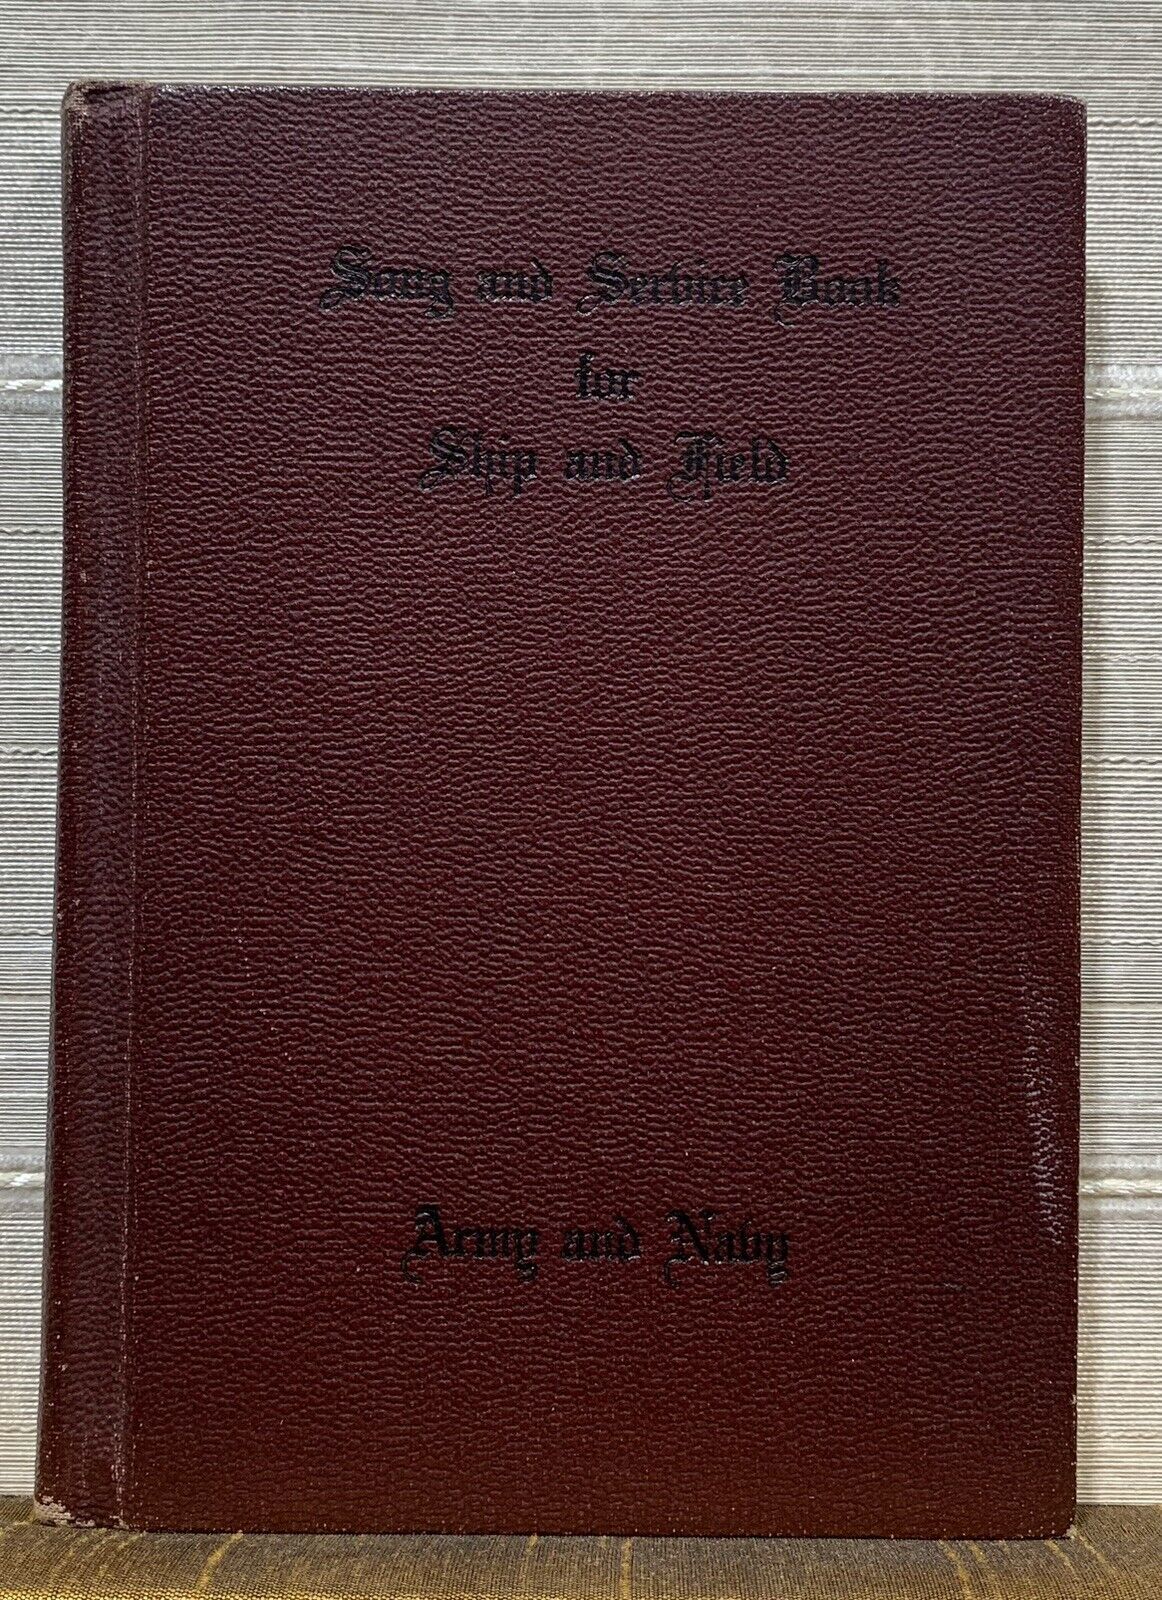 Song and Service Book for Ship and Field Army and Navy 1941 Antique WWII